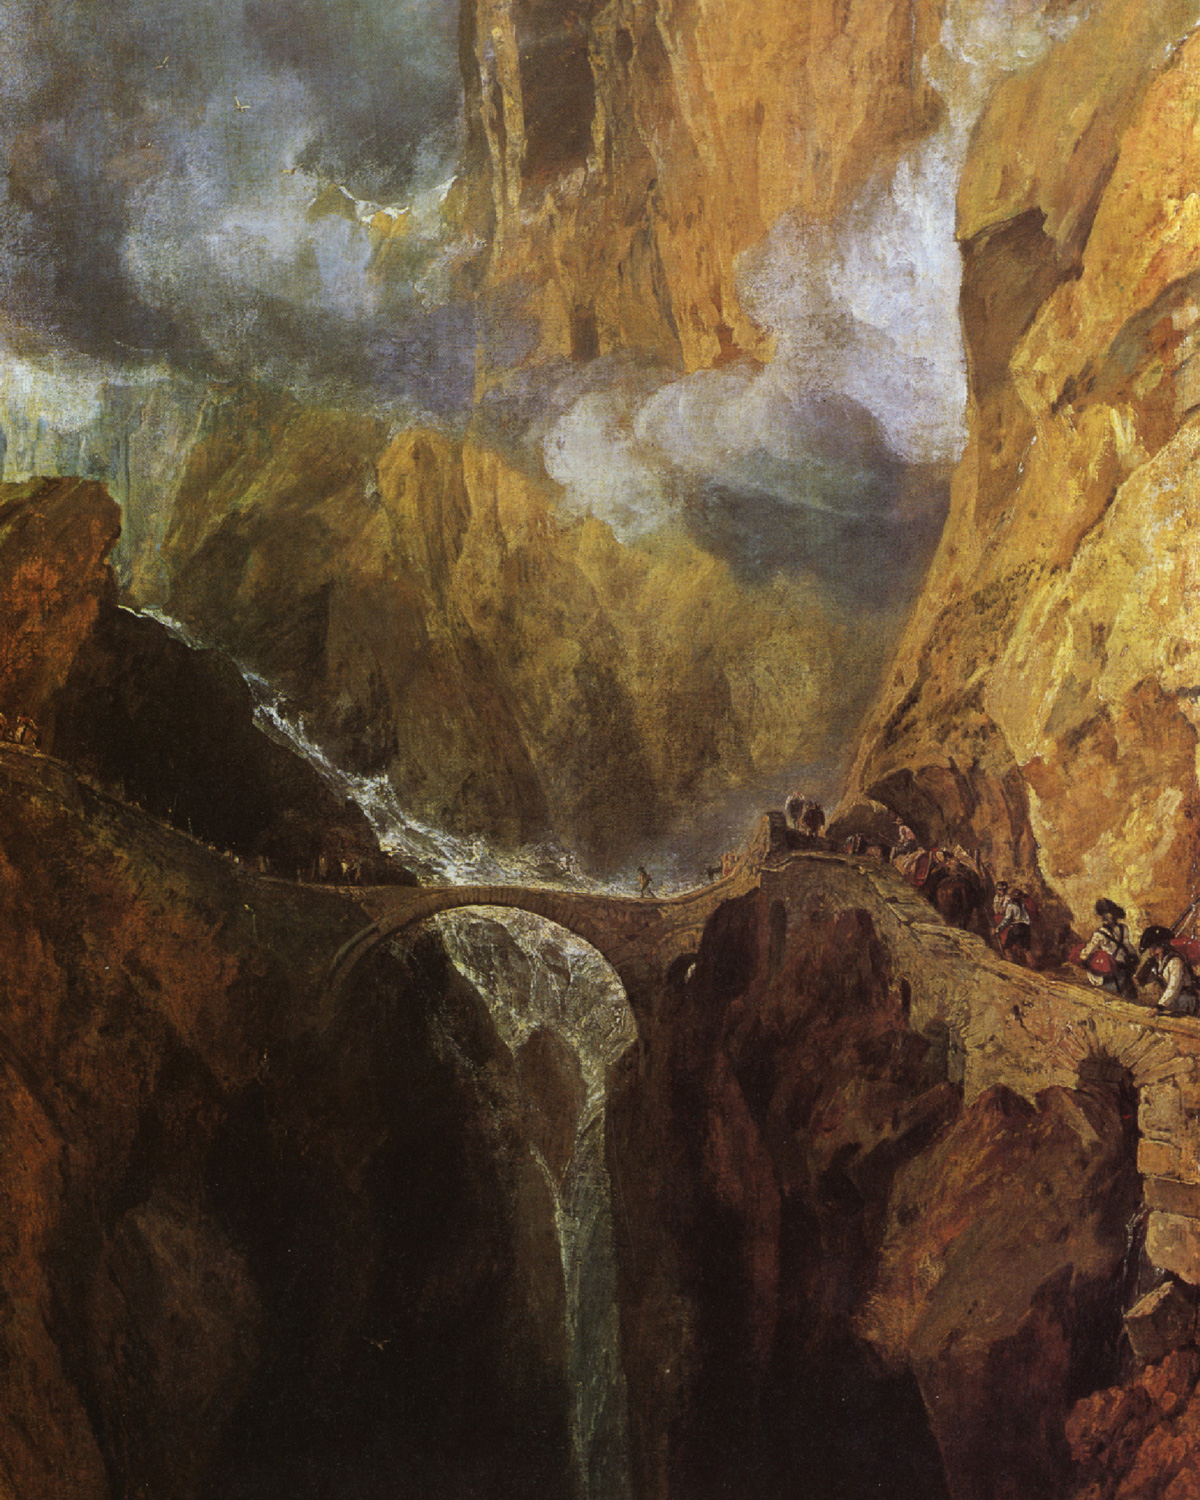 A painting by J. M. W. Turner titled “St. Gotthard Pass,” eighteen oh three to eighteen oh four.